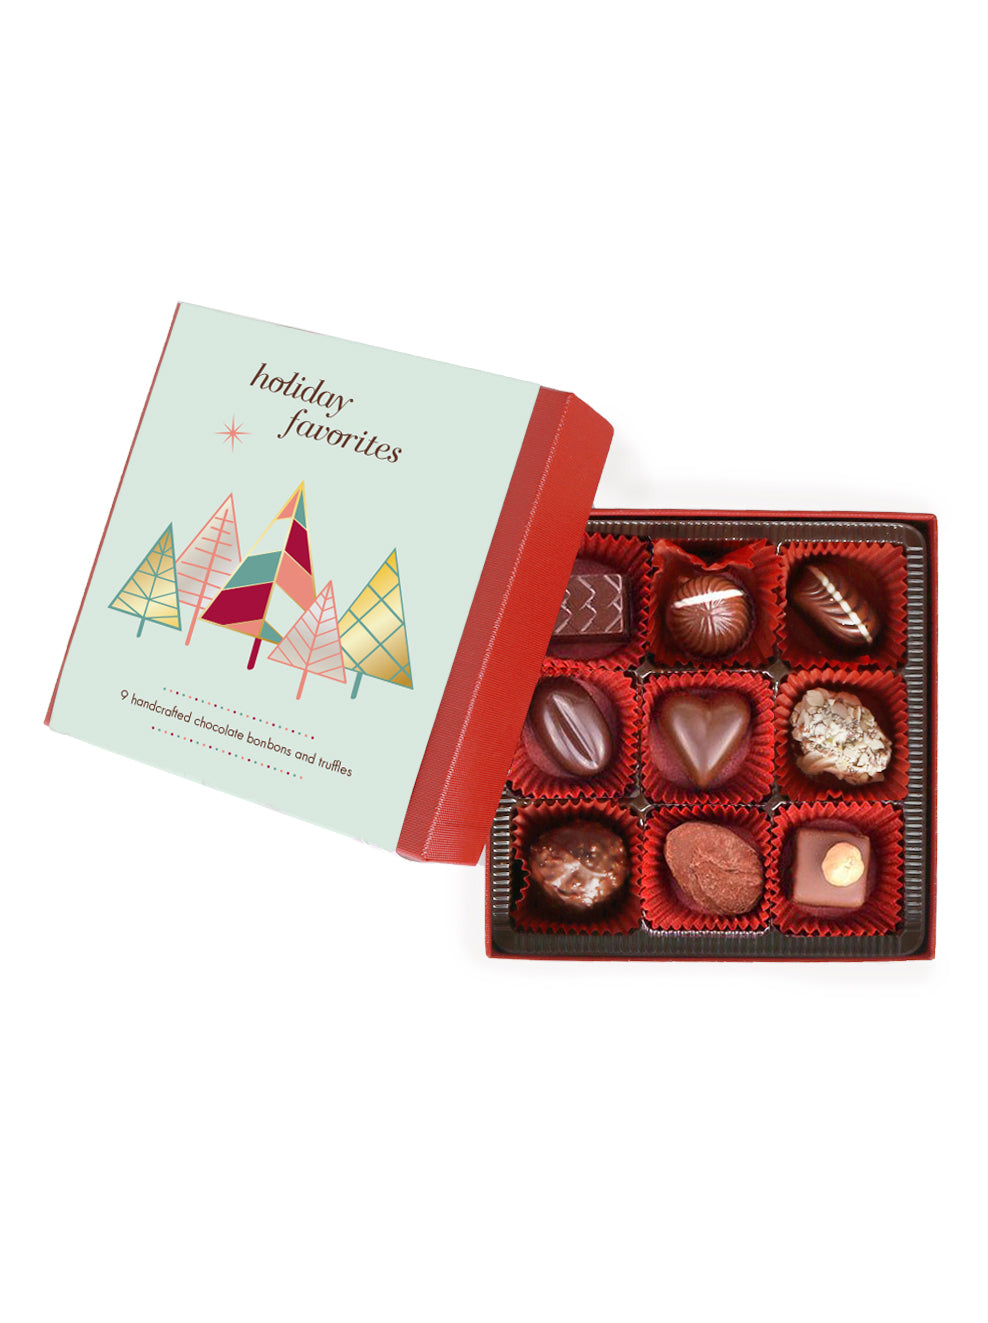 holiday favorites bonbons and truffles